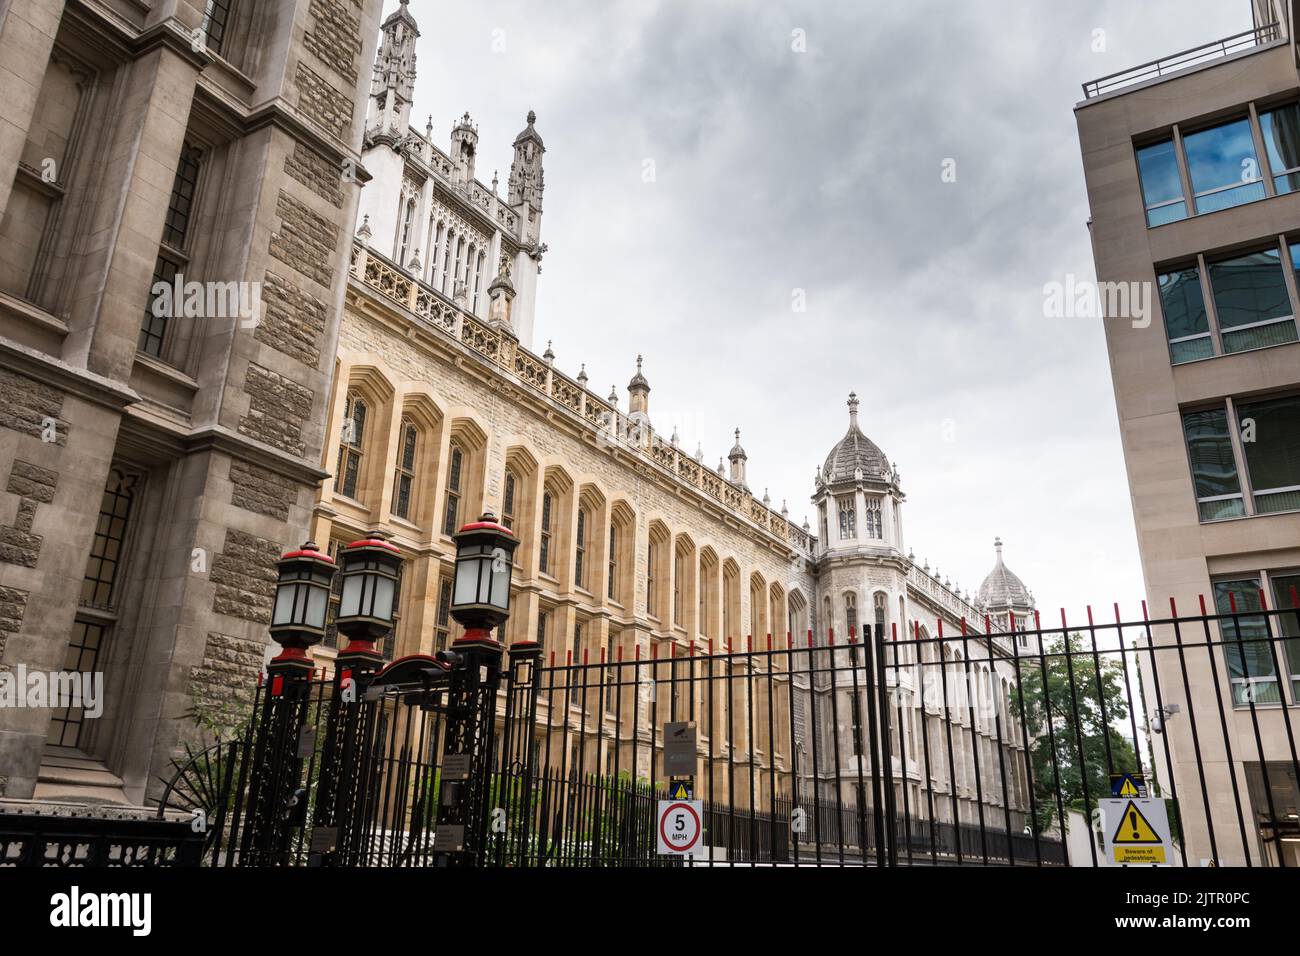 The Maughan Library, King's College London, Fetter Lane, Londres, Inglaterra, REINO UNIDO Foto de stock